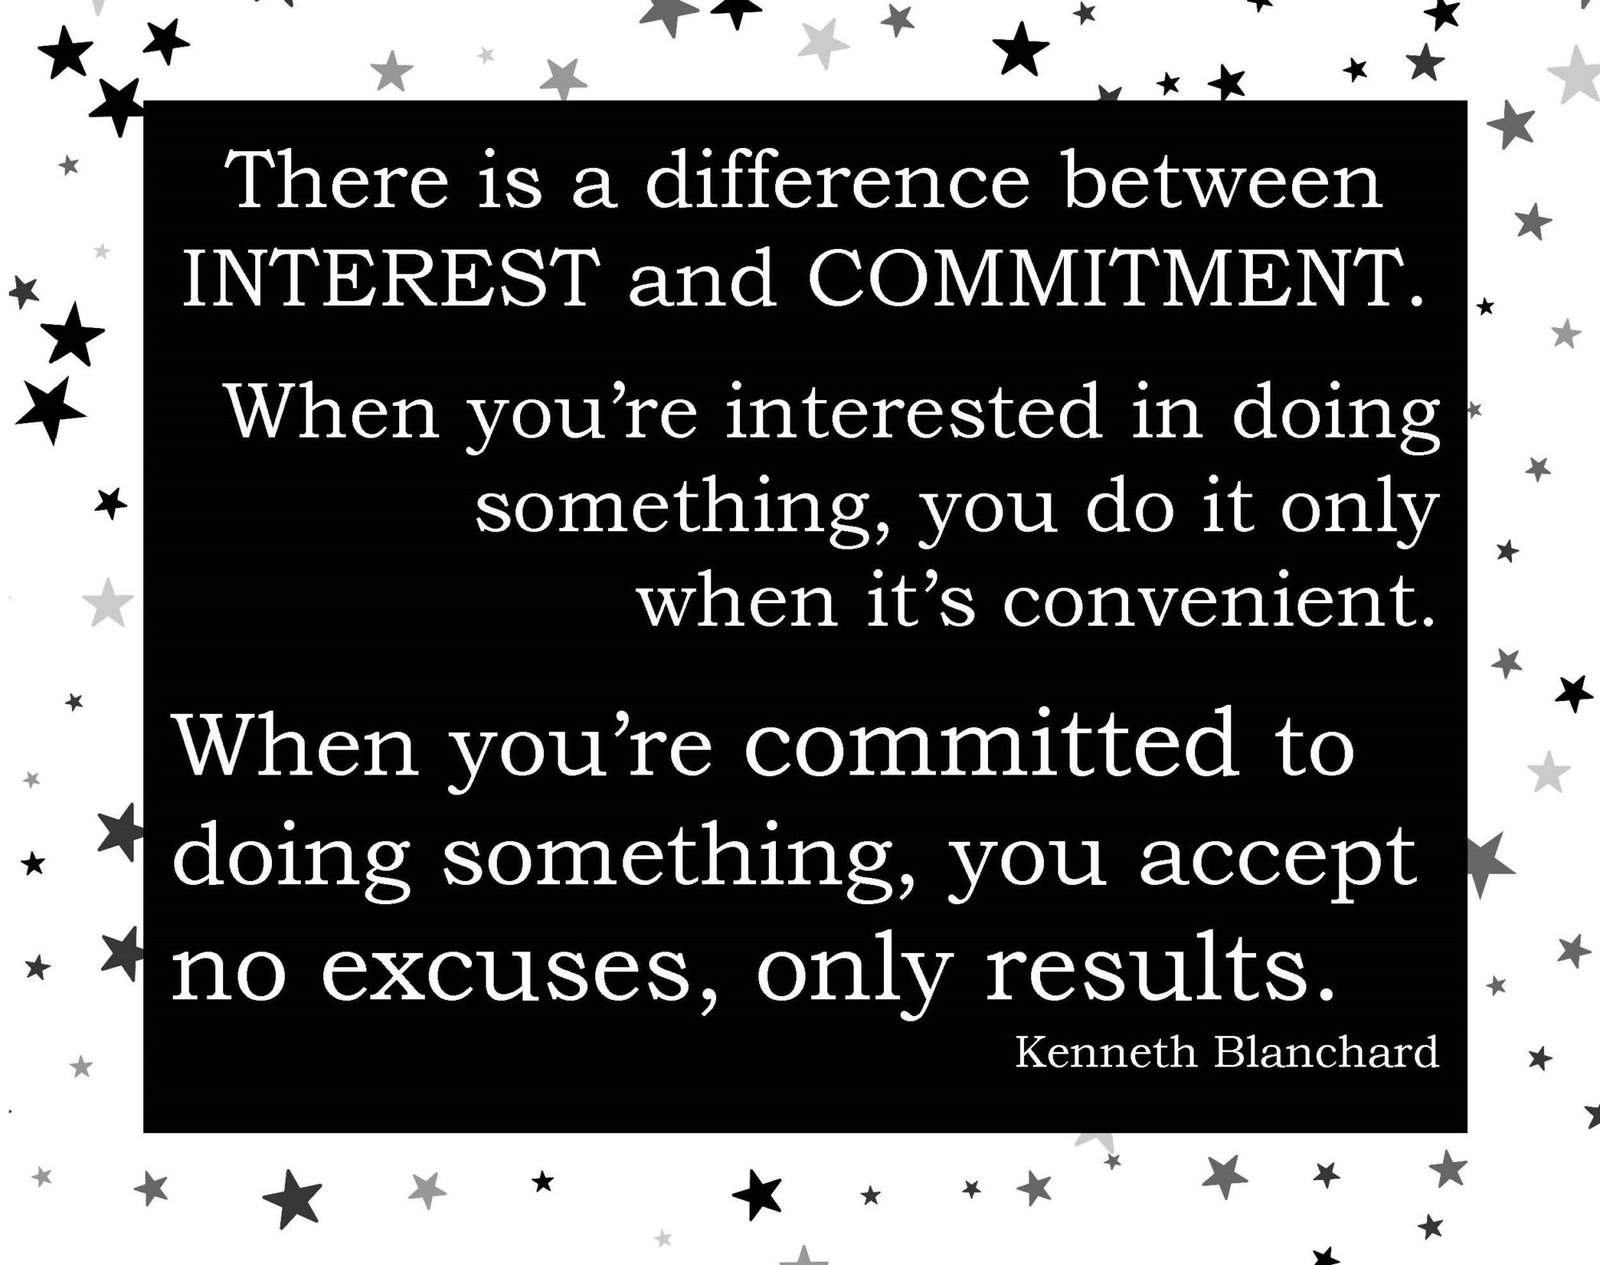 There is a difference between Interest and Commitment